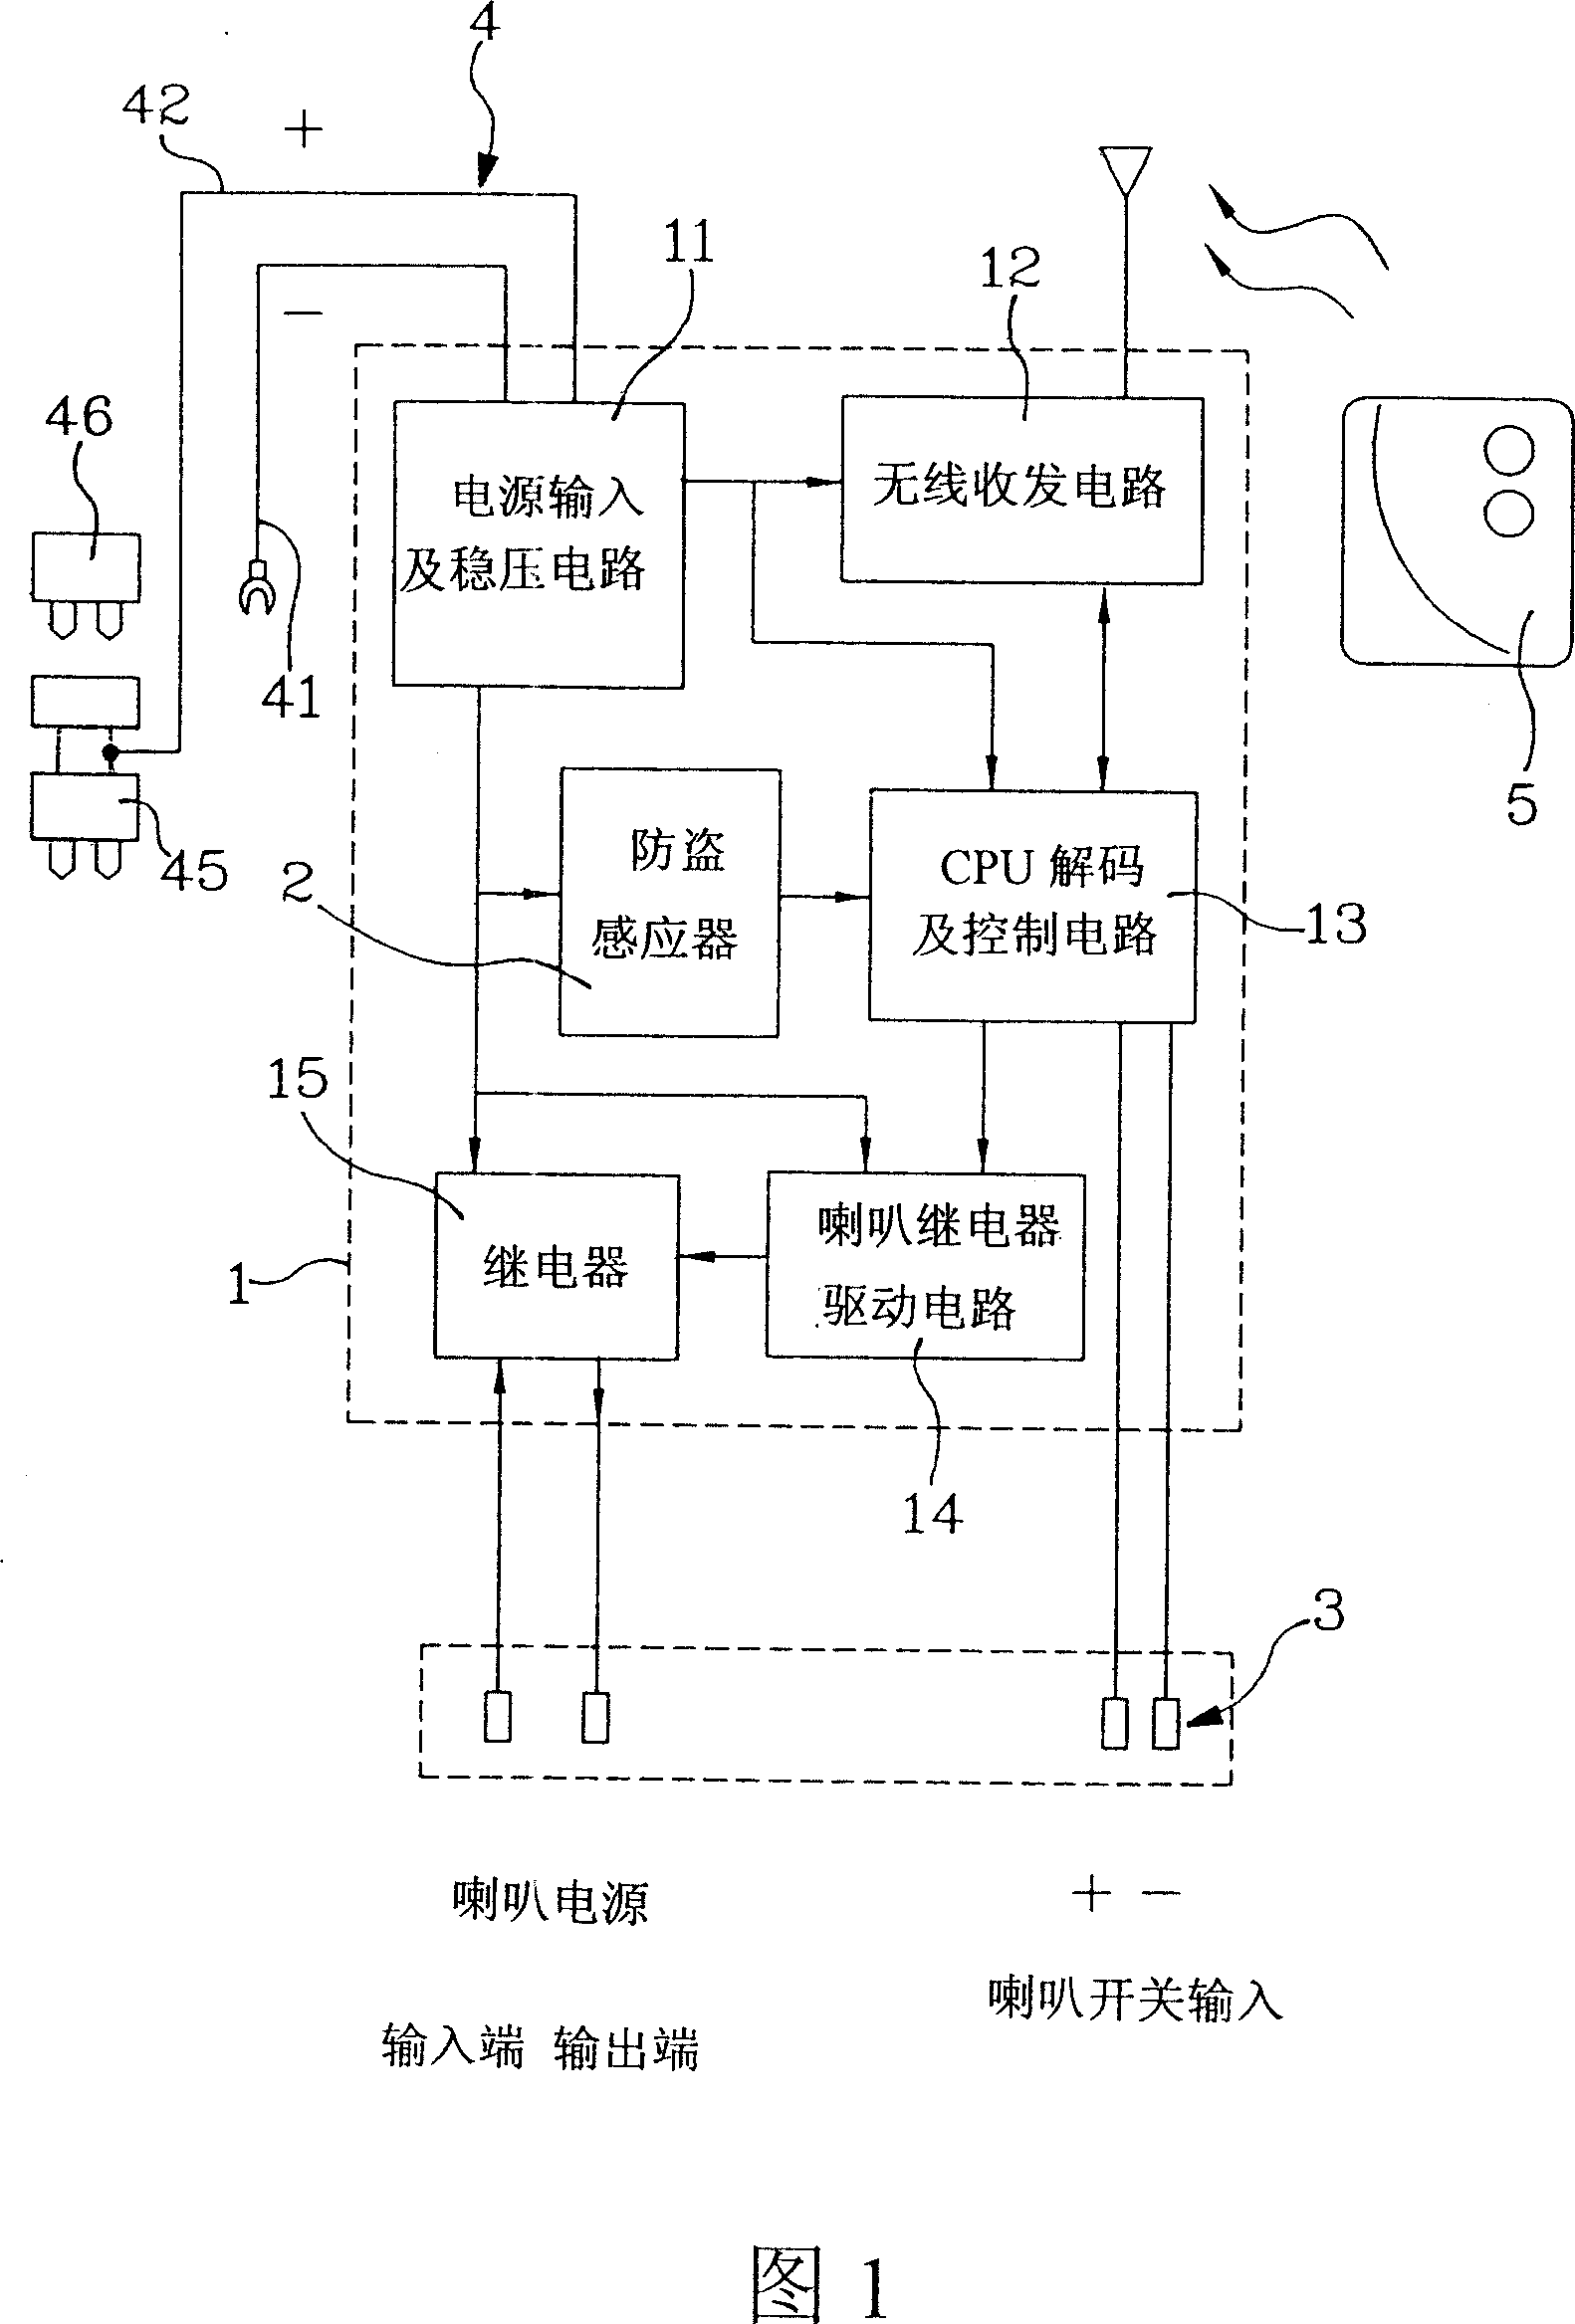 Theftproof system for wireless horn of vehicle relay